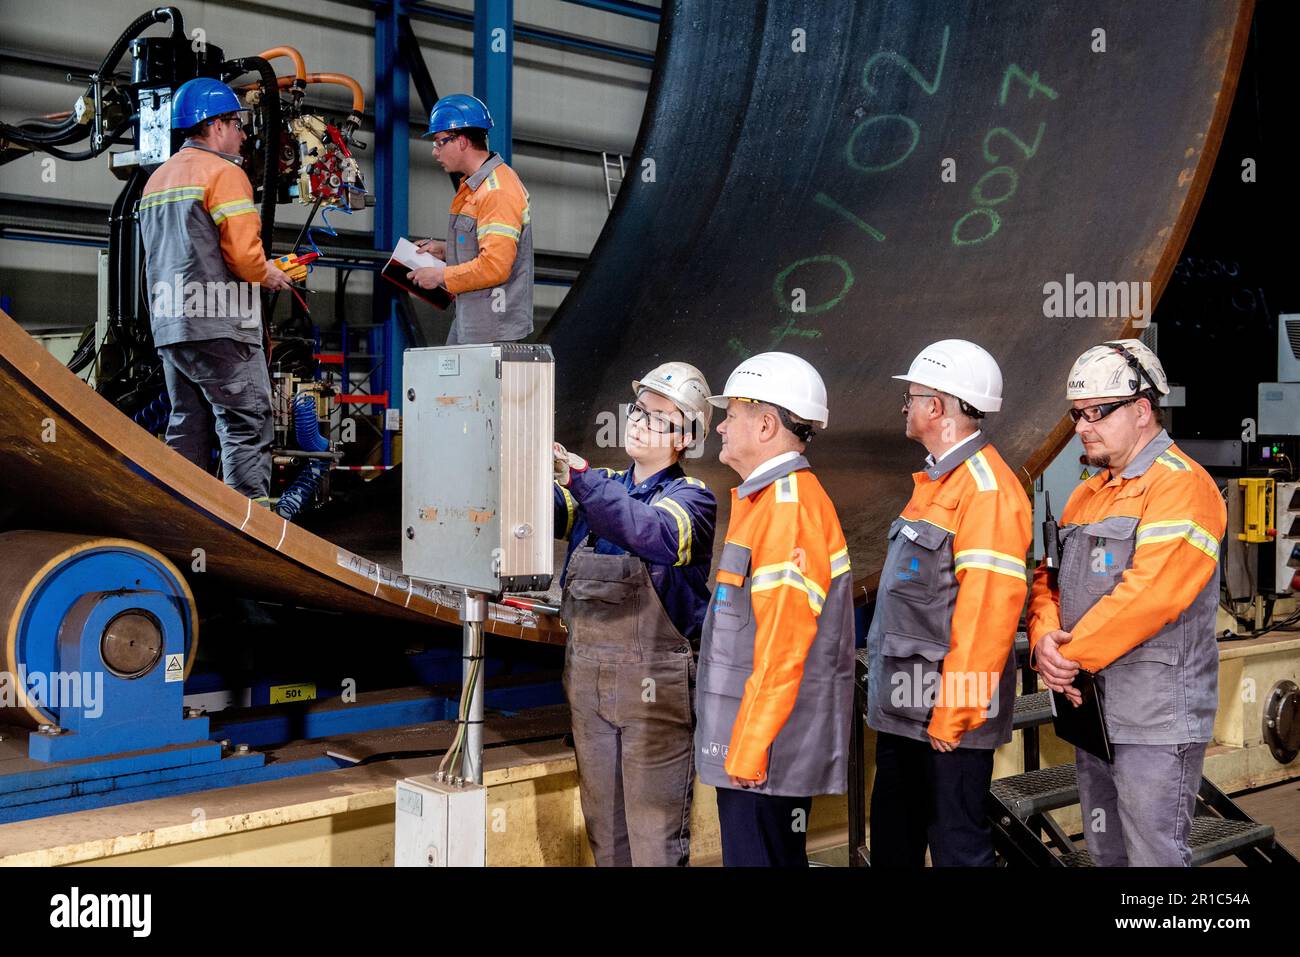 Nordenham, Germany. 12th May, 2023. Janina Patricia Schweitzer (l-r), a production employee at Steelwind Nordenham GmbH, shows German Chancellor Olaf Scholz (SPD), Andreas Liessem, managing director of Steelwind Nordenham GmbH, and Jörg Redmer, a production employee, the function of the longitudinal internal seam welding machine used to manufacture steel foundations for wind turbines. Scholz visited the production of steel foundations, so-called monopiles, for wind turbines in offshore wind farms at Steelwind Nordenham GmbH. Credit: Hauke-Christian Dittrich/dpa/Alamy Live News Stock Photo